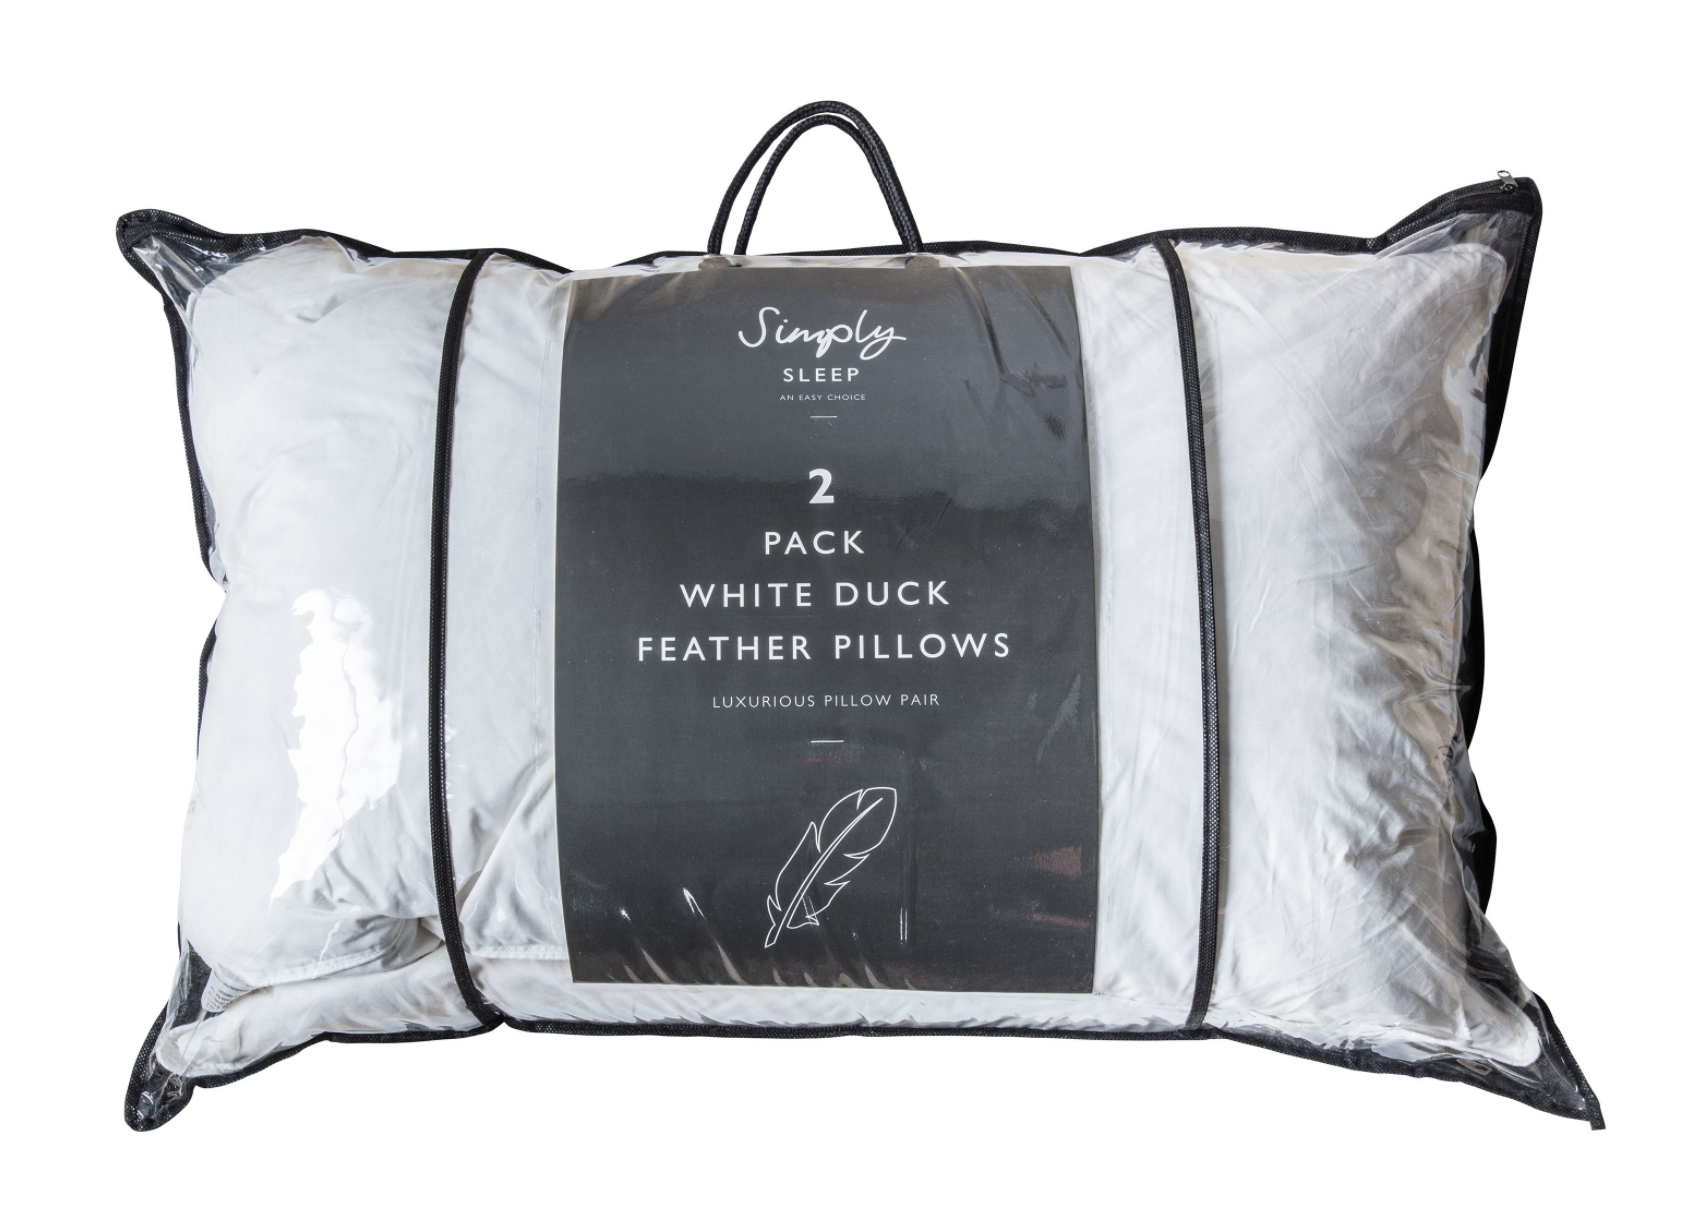 bagged 2 pack of feather pillows